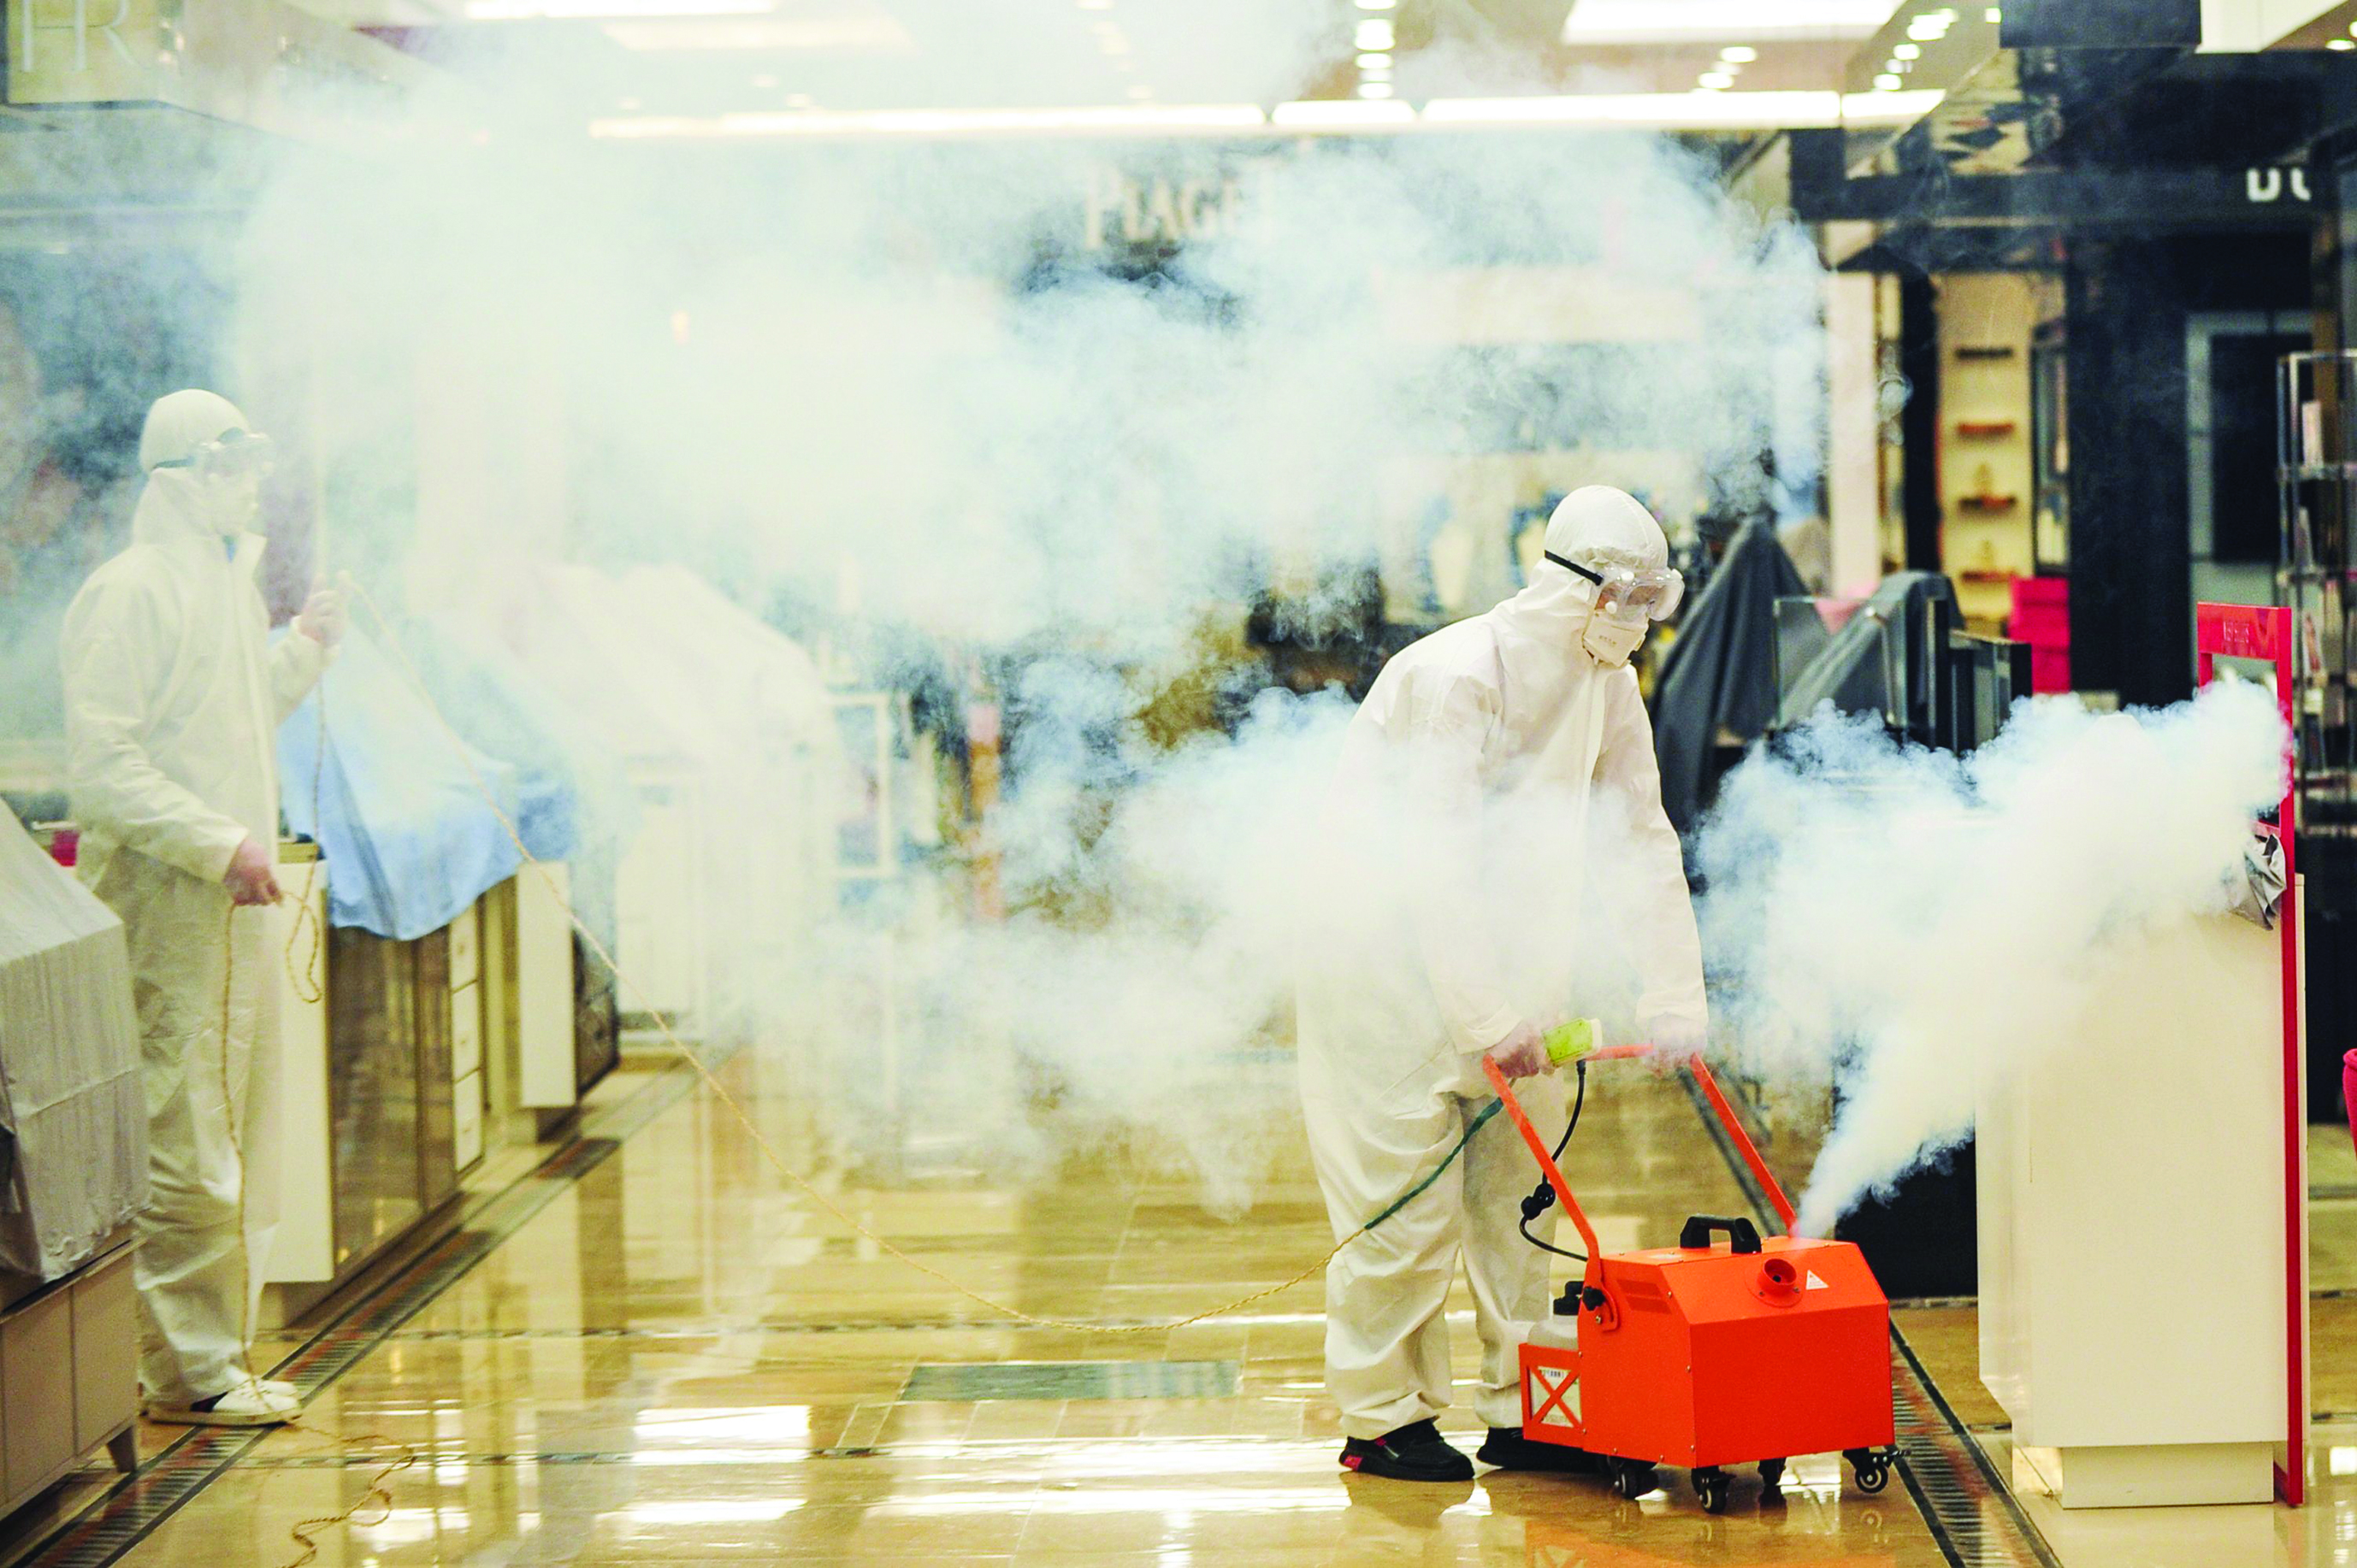 This photo taken on March 29, 2020 shows staff members spraying disinfectant at a shopping mall as it prepares to reopen to the public after closing due to the COVID-19 coronavirus outbreak in Wuhan in China's central Hubei province. - Wuhan, the central Chinese city where the coronavirus first emerged last year, partly reopened on March 28 after more than two months of near total isolation for its population of 11 million. (Photo by STR / AFP) / China OUT